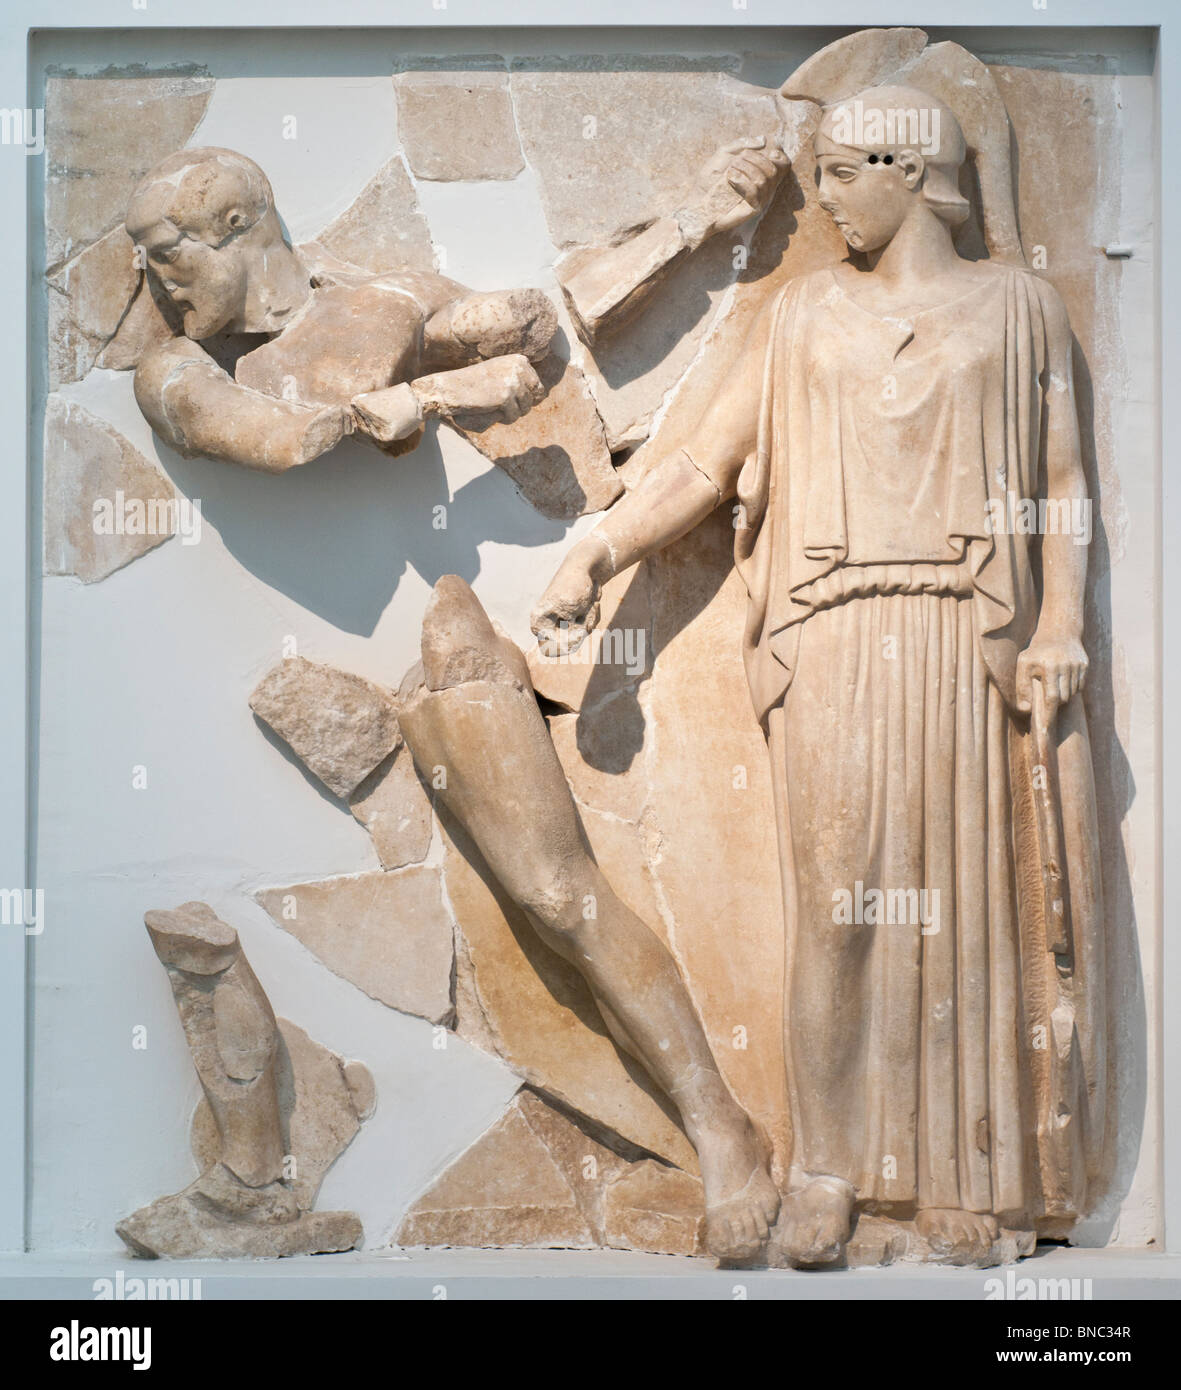 Metope 12 of the Temple of Zeus at Olympia: Herakles cleaning the stables of Augeas as Athena directs him. Stock Photo